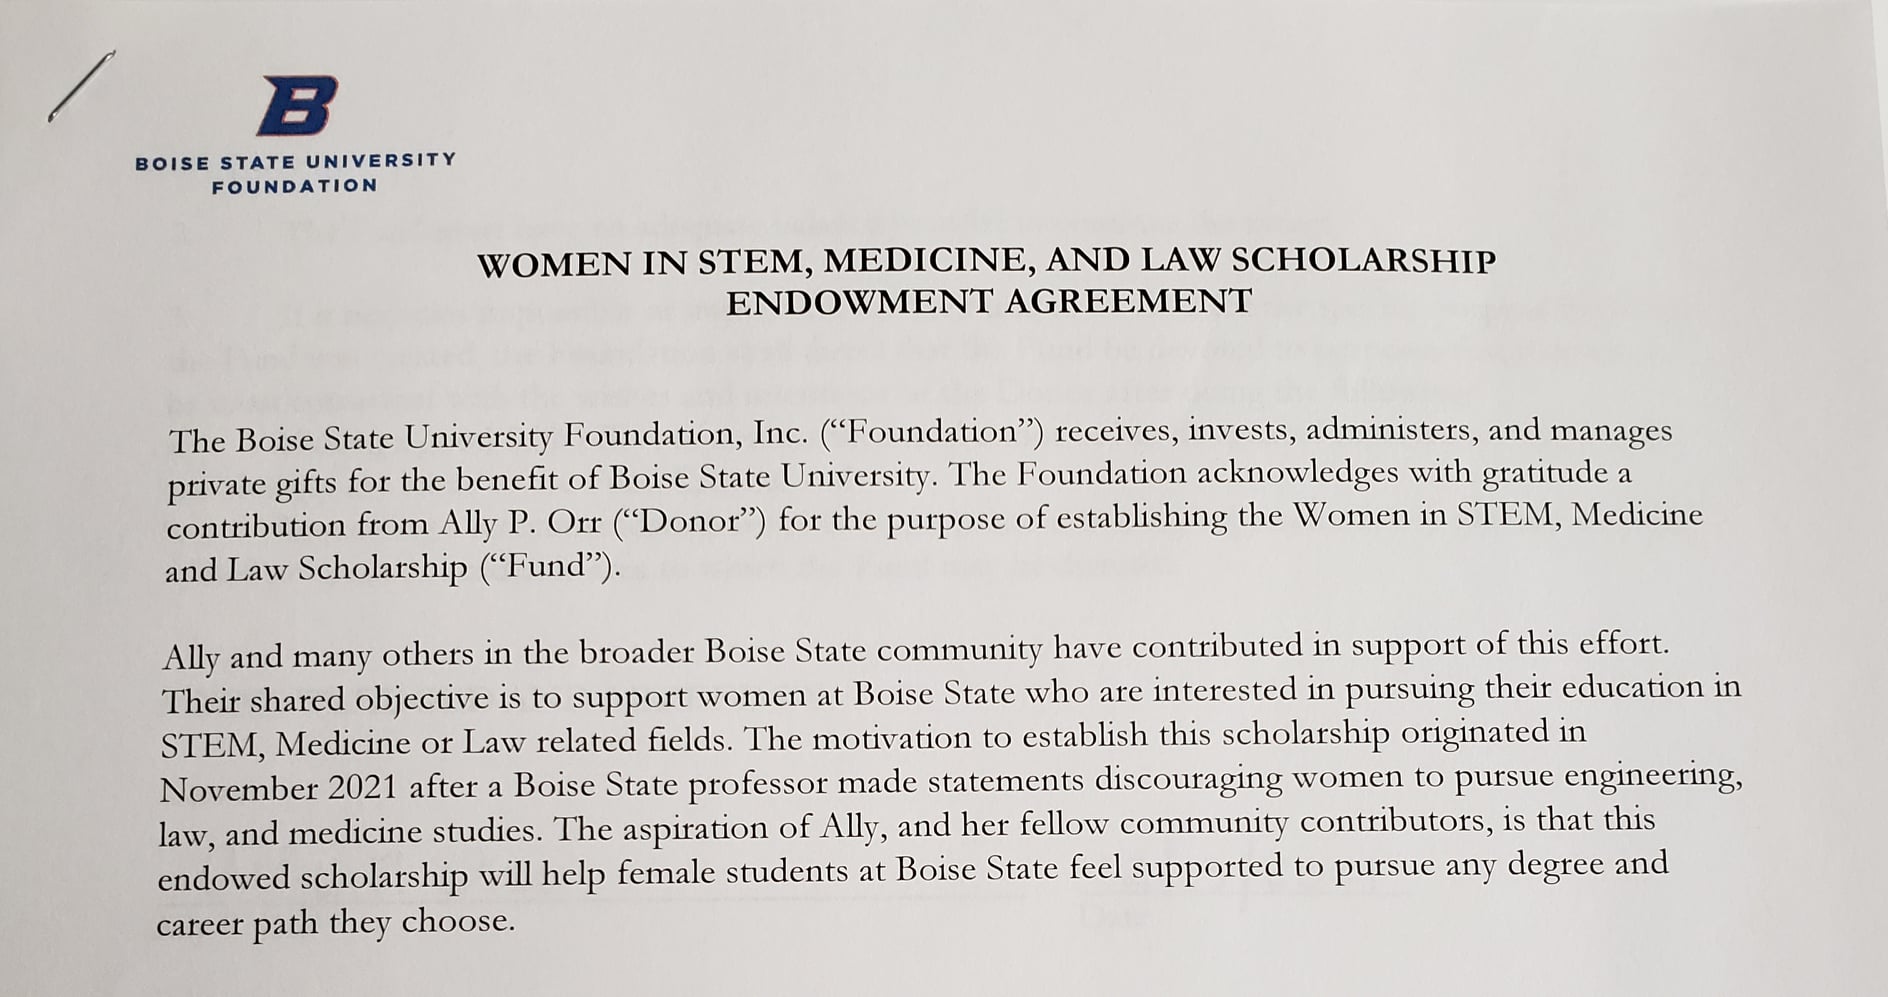 photo of the "women in stem, medicine, and law scholarship endowment agreement" at boise state university that was started by a woman named ally orr